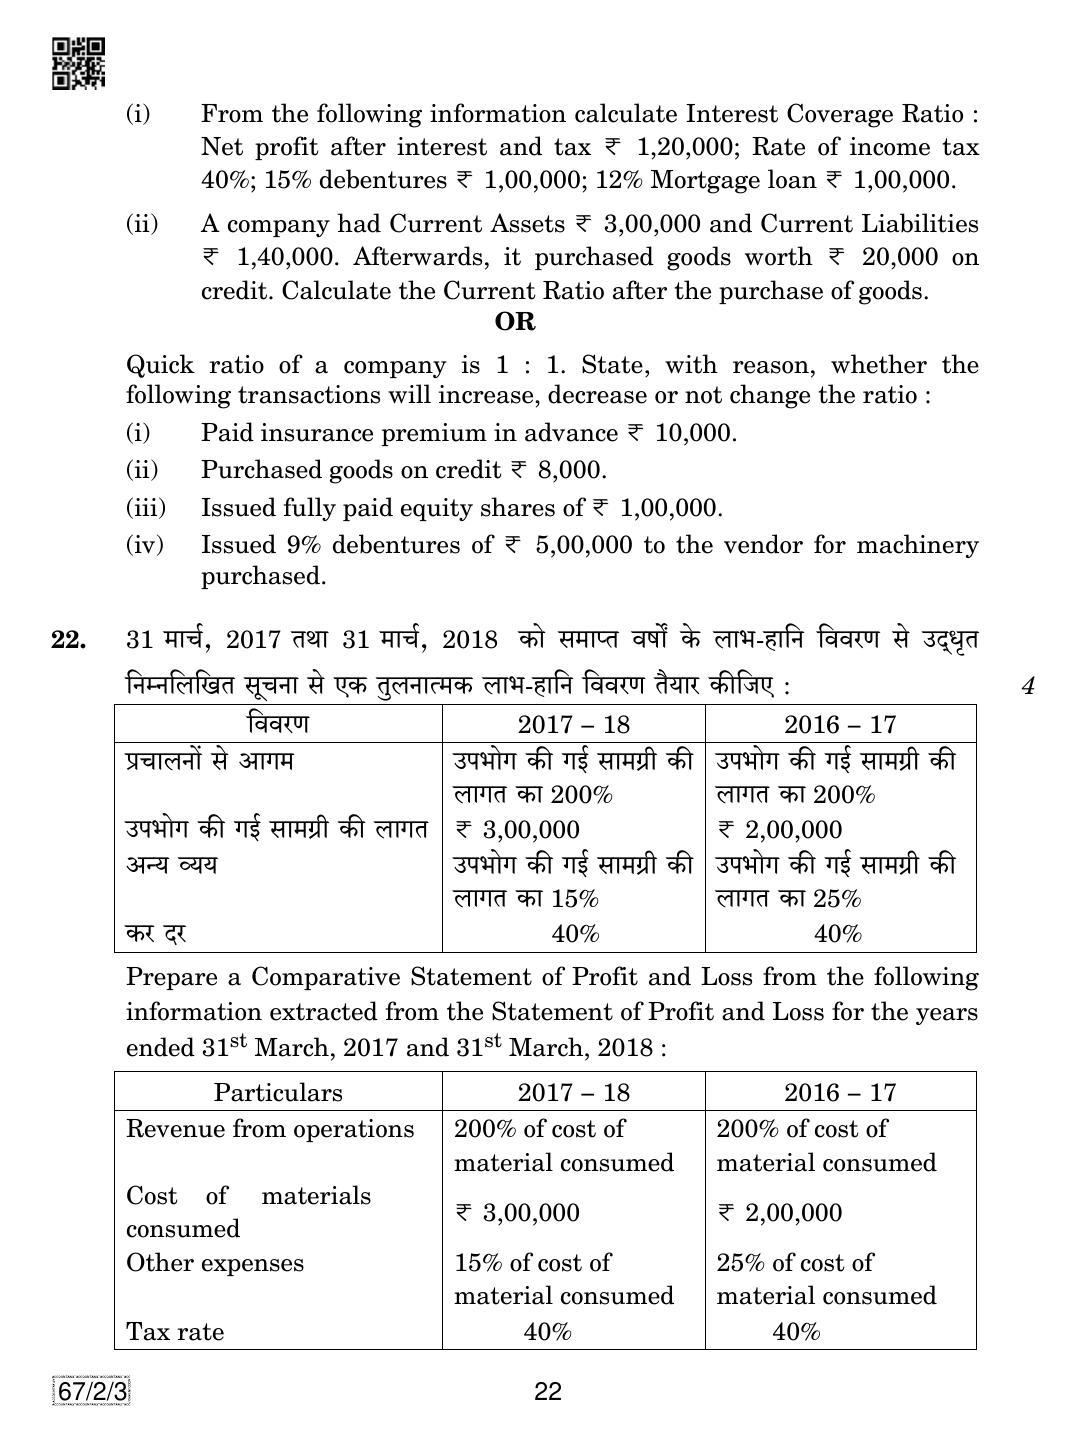 CBSE Class 12 67-2-3 Accountancy 2019 Question Paper - Page 22